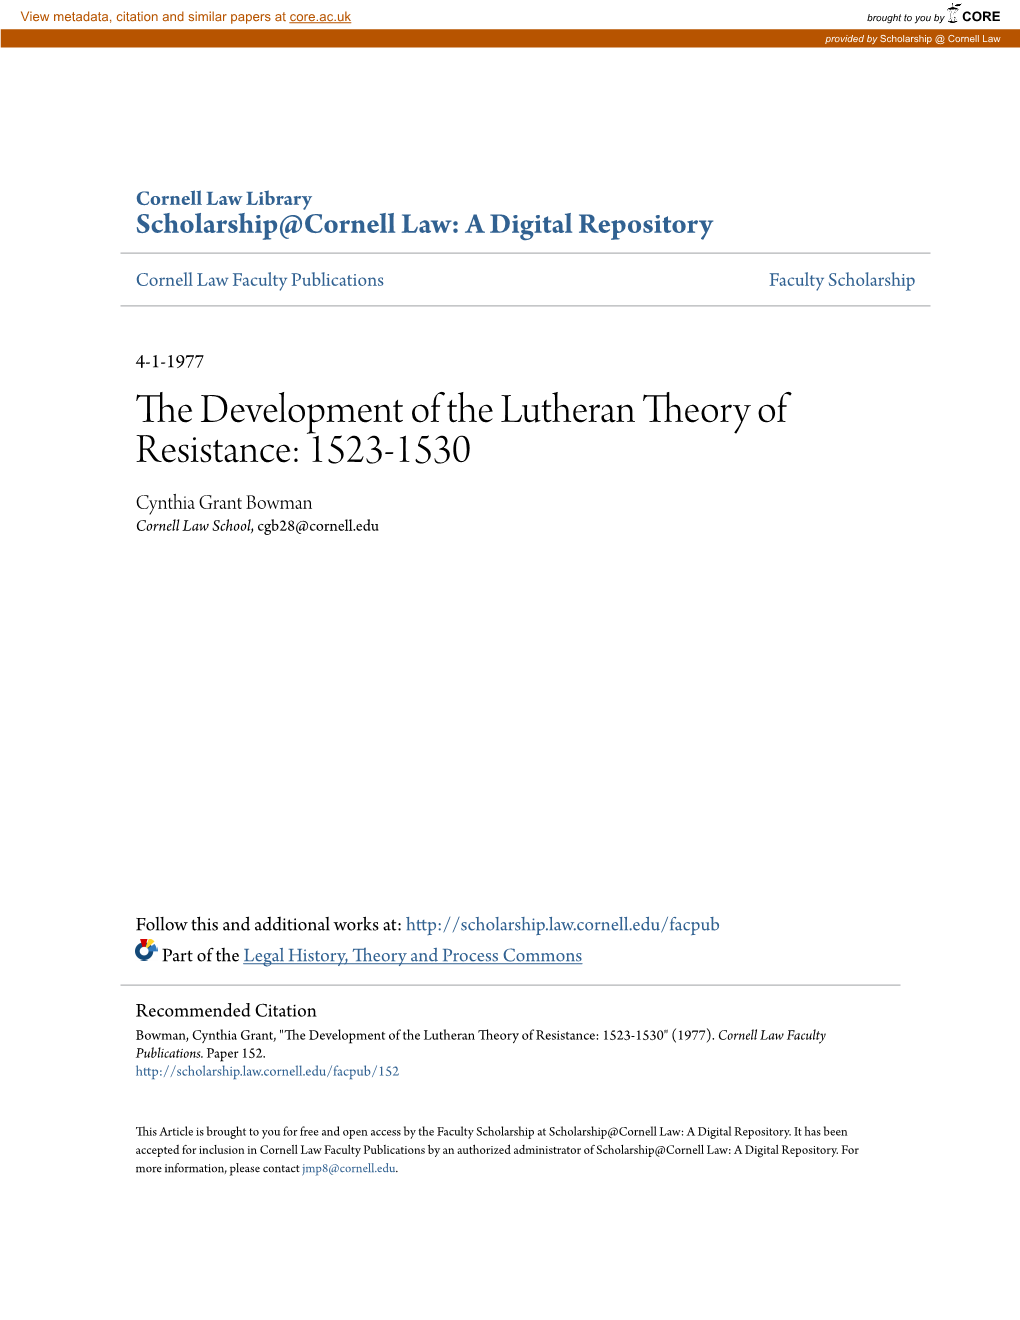 The Development of the Lutheran Theory of Resistance